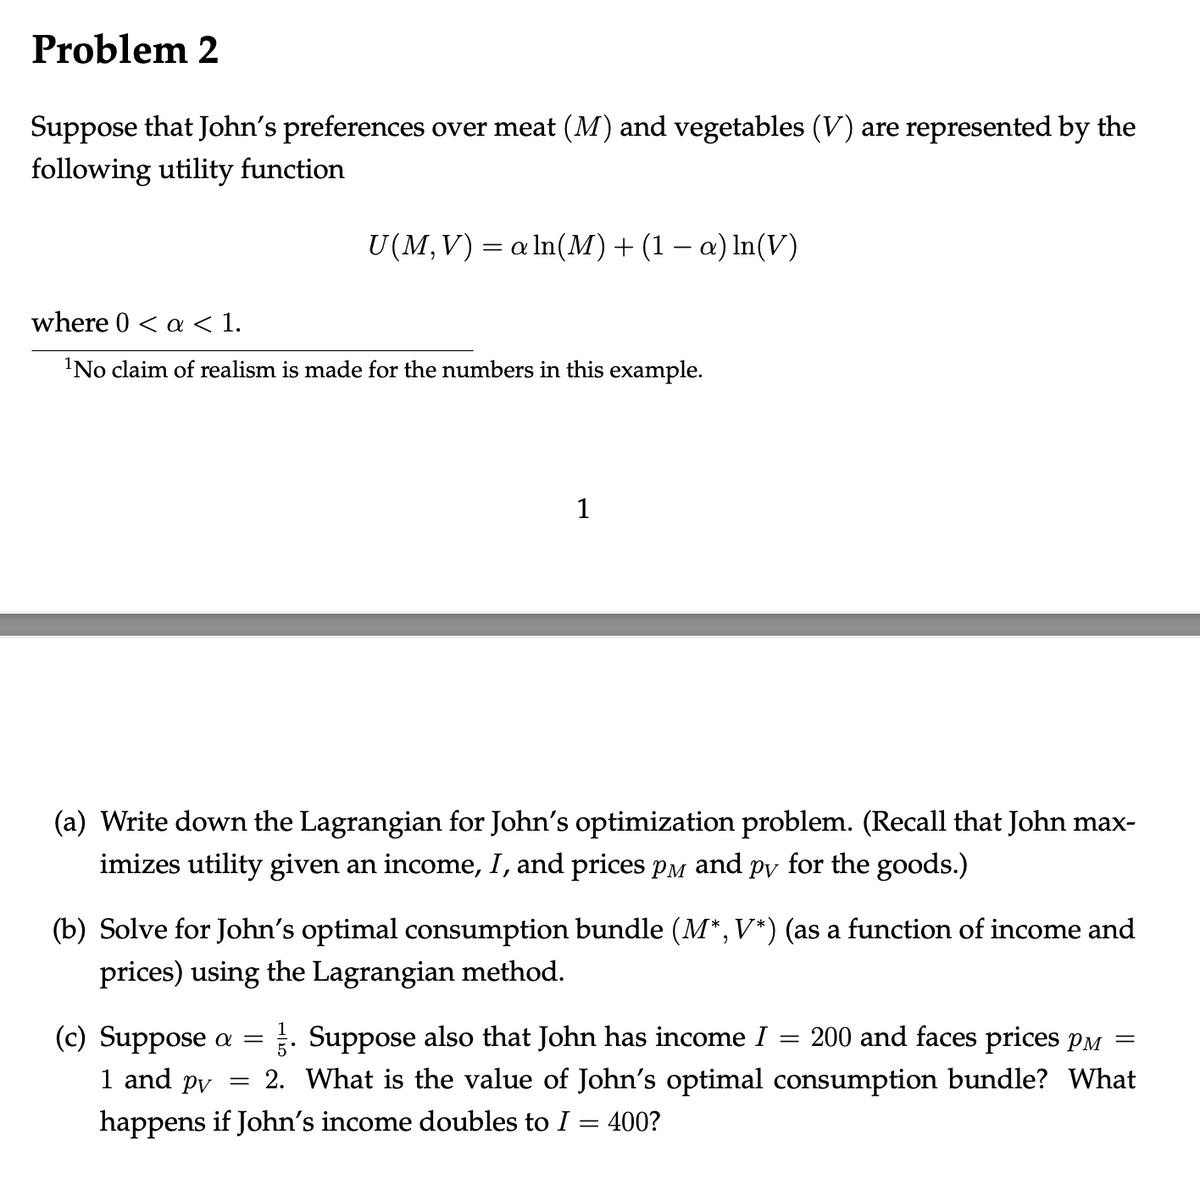 Problem 2
Suppose that John's preferences over meat (M) and vegetables (V) are represented by the
following utility function
U(M,V) = a ln(M) + (1 − a) ln(V)
where 0 < a < 1.
¹No claim of realism is made for the numbers in this example.
1
(a) Write down the Lagrangian for John's optimization problem. (Recall that John max-
imizes utility given an income, I, and prices pè and på for the goods.)
(b) Solve for John's optimal consumption bundle (M*, V*) (as a function of income and
prices) using the Lagrangian method.
=
(c) Suppose a = . Suppose also that John has income I
=
1 and pv
2. What is the value of John's optimal
happens if John's income doubles to I = 400?
200 and faces prices p
consumption bundle? What
=